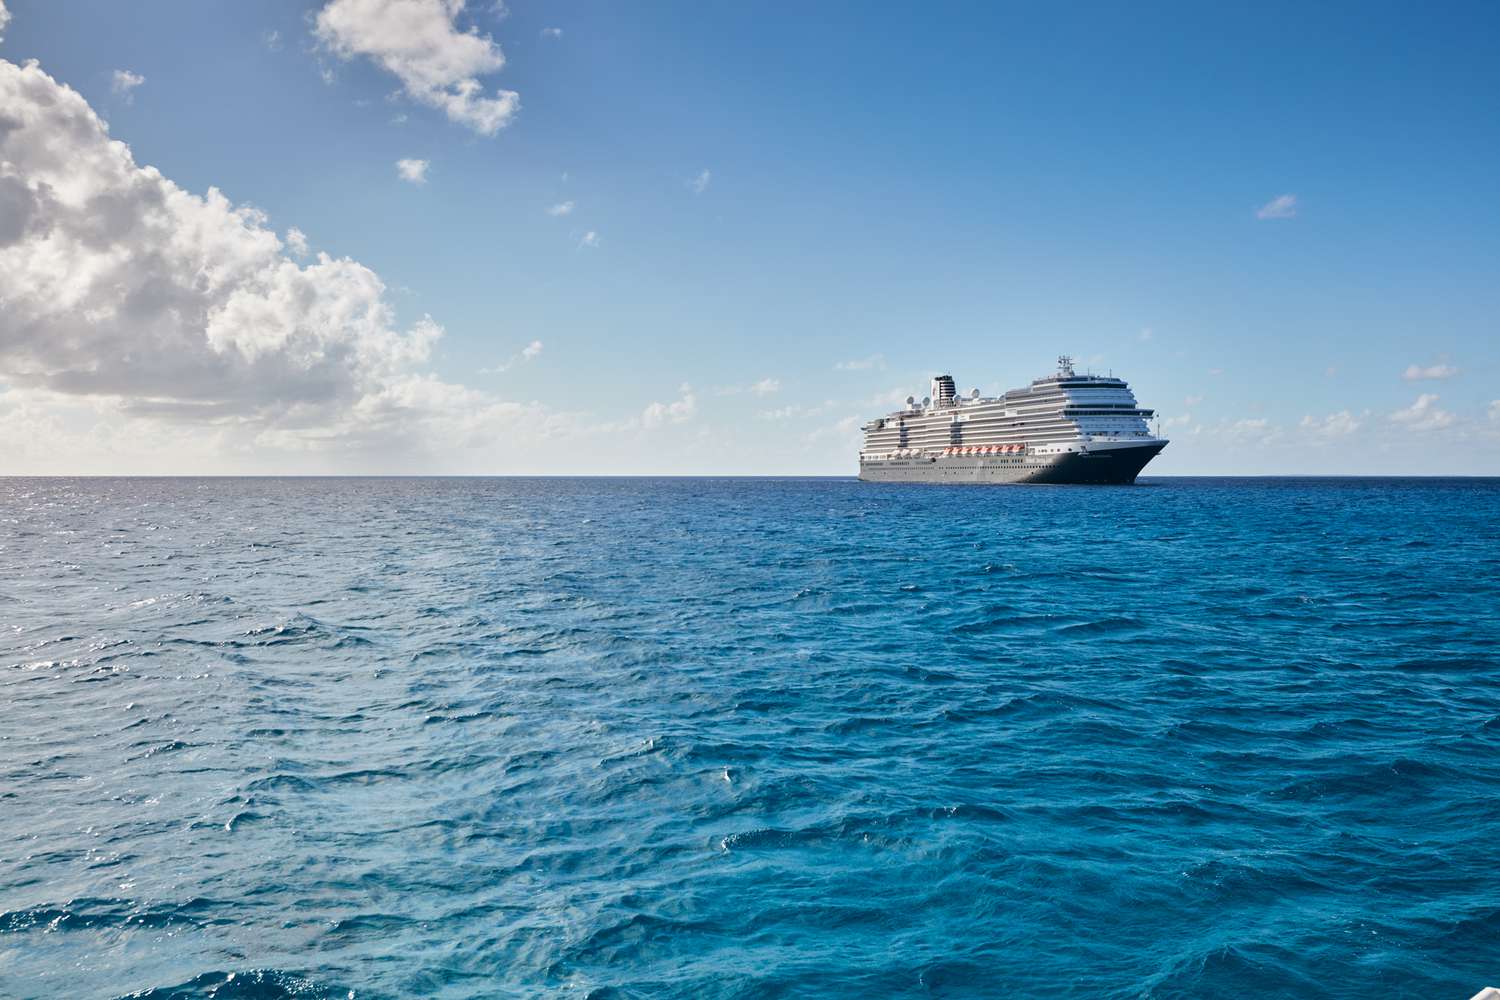 This Cruise Line Is Offering Trips for as Low as $49 a Day — Heres How to Get On Board